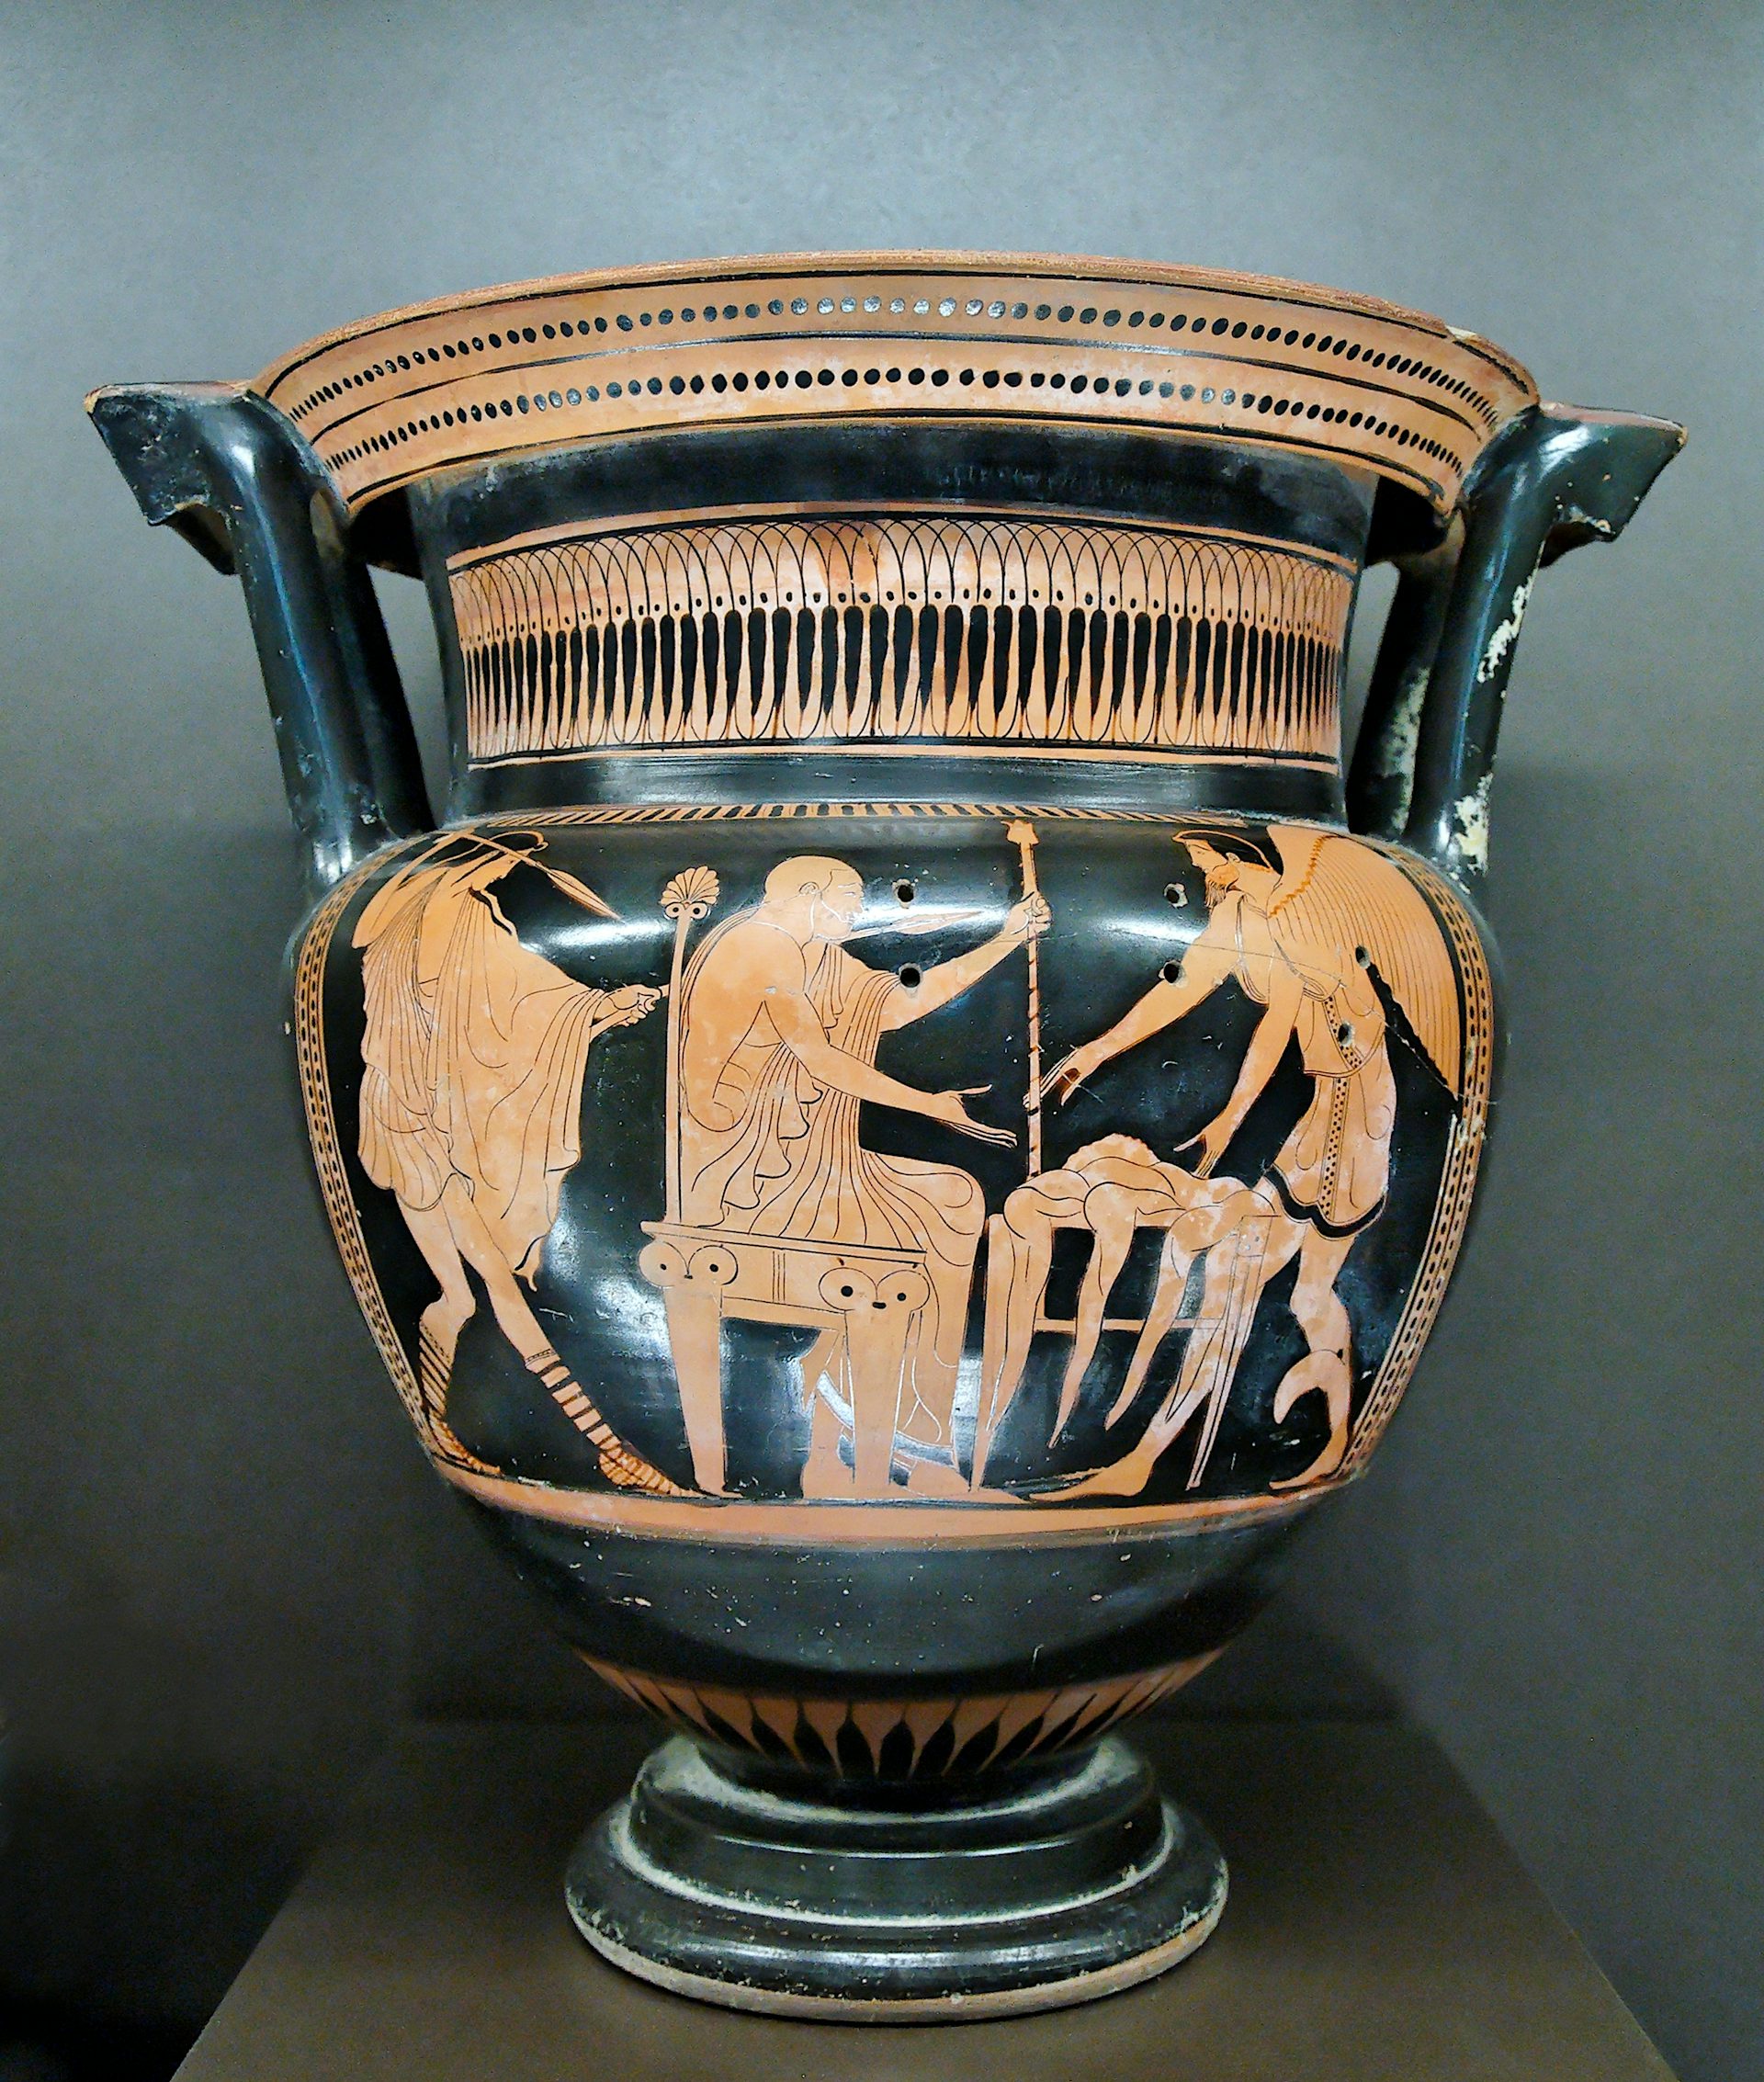 Boreads rescue Phineas from the harpies red figure column krater, 460 BCE